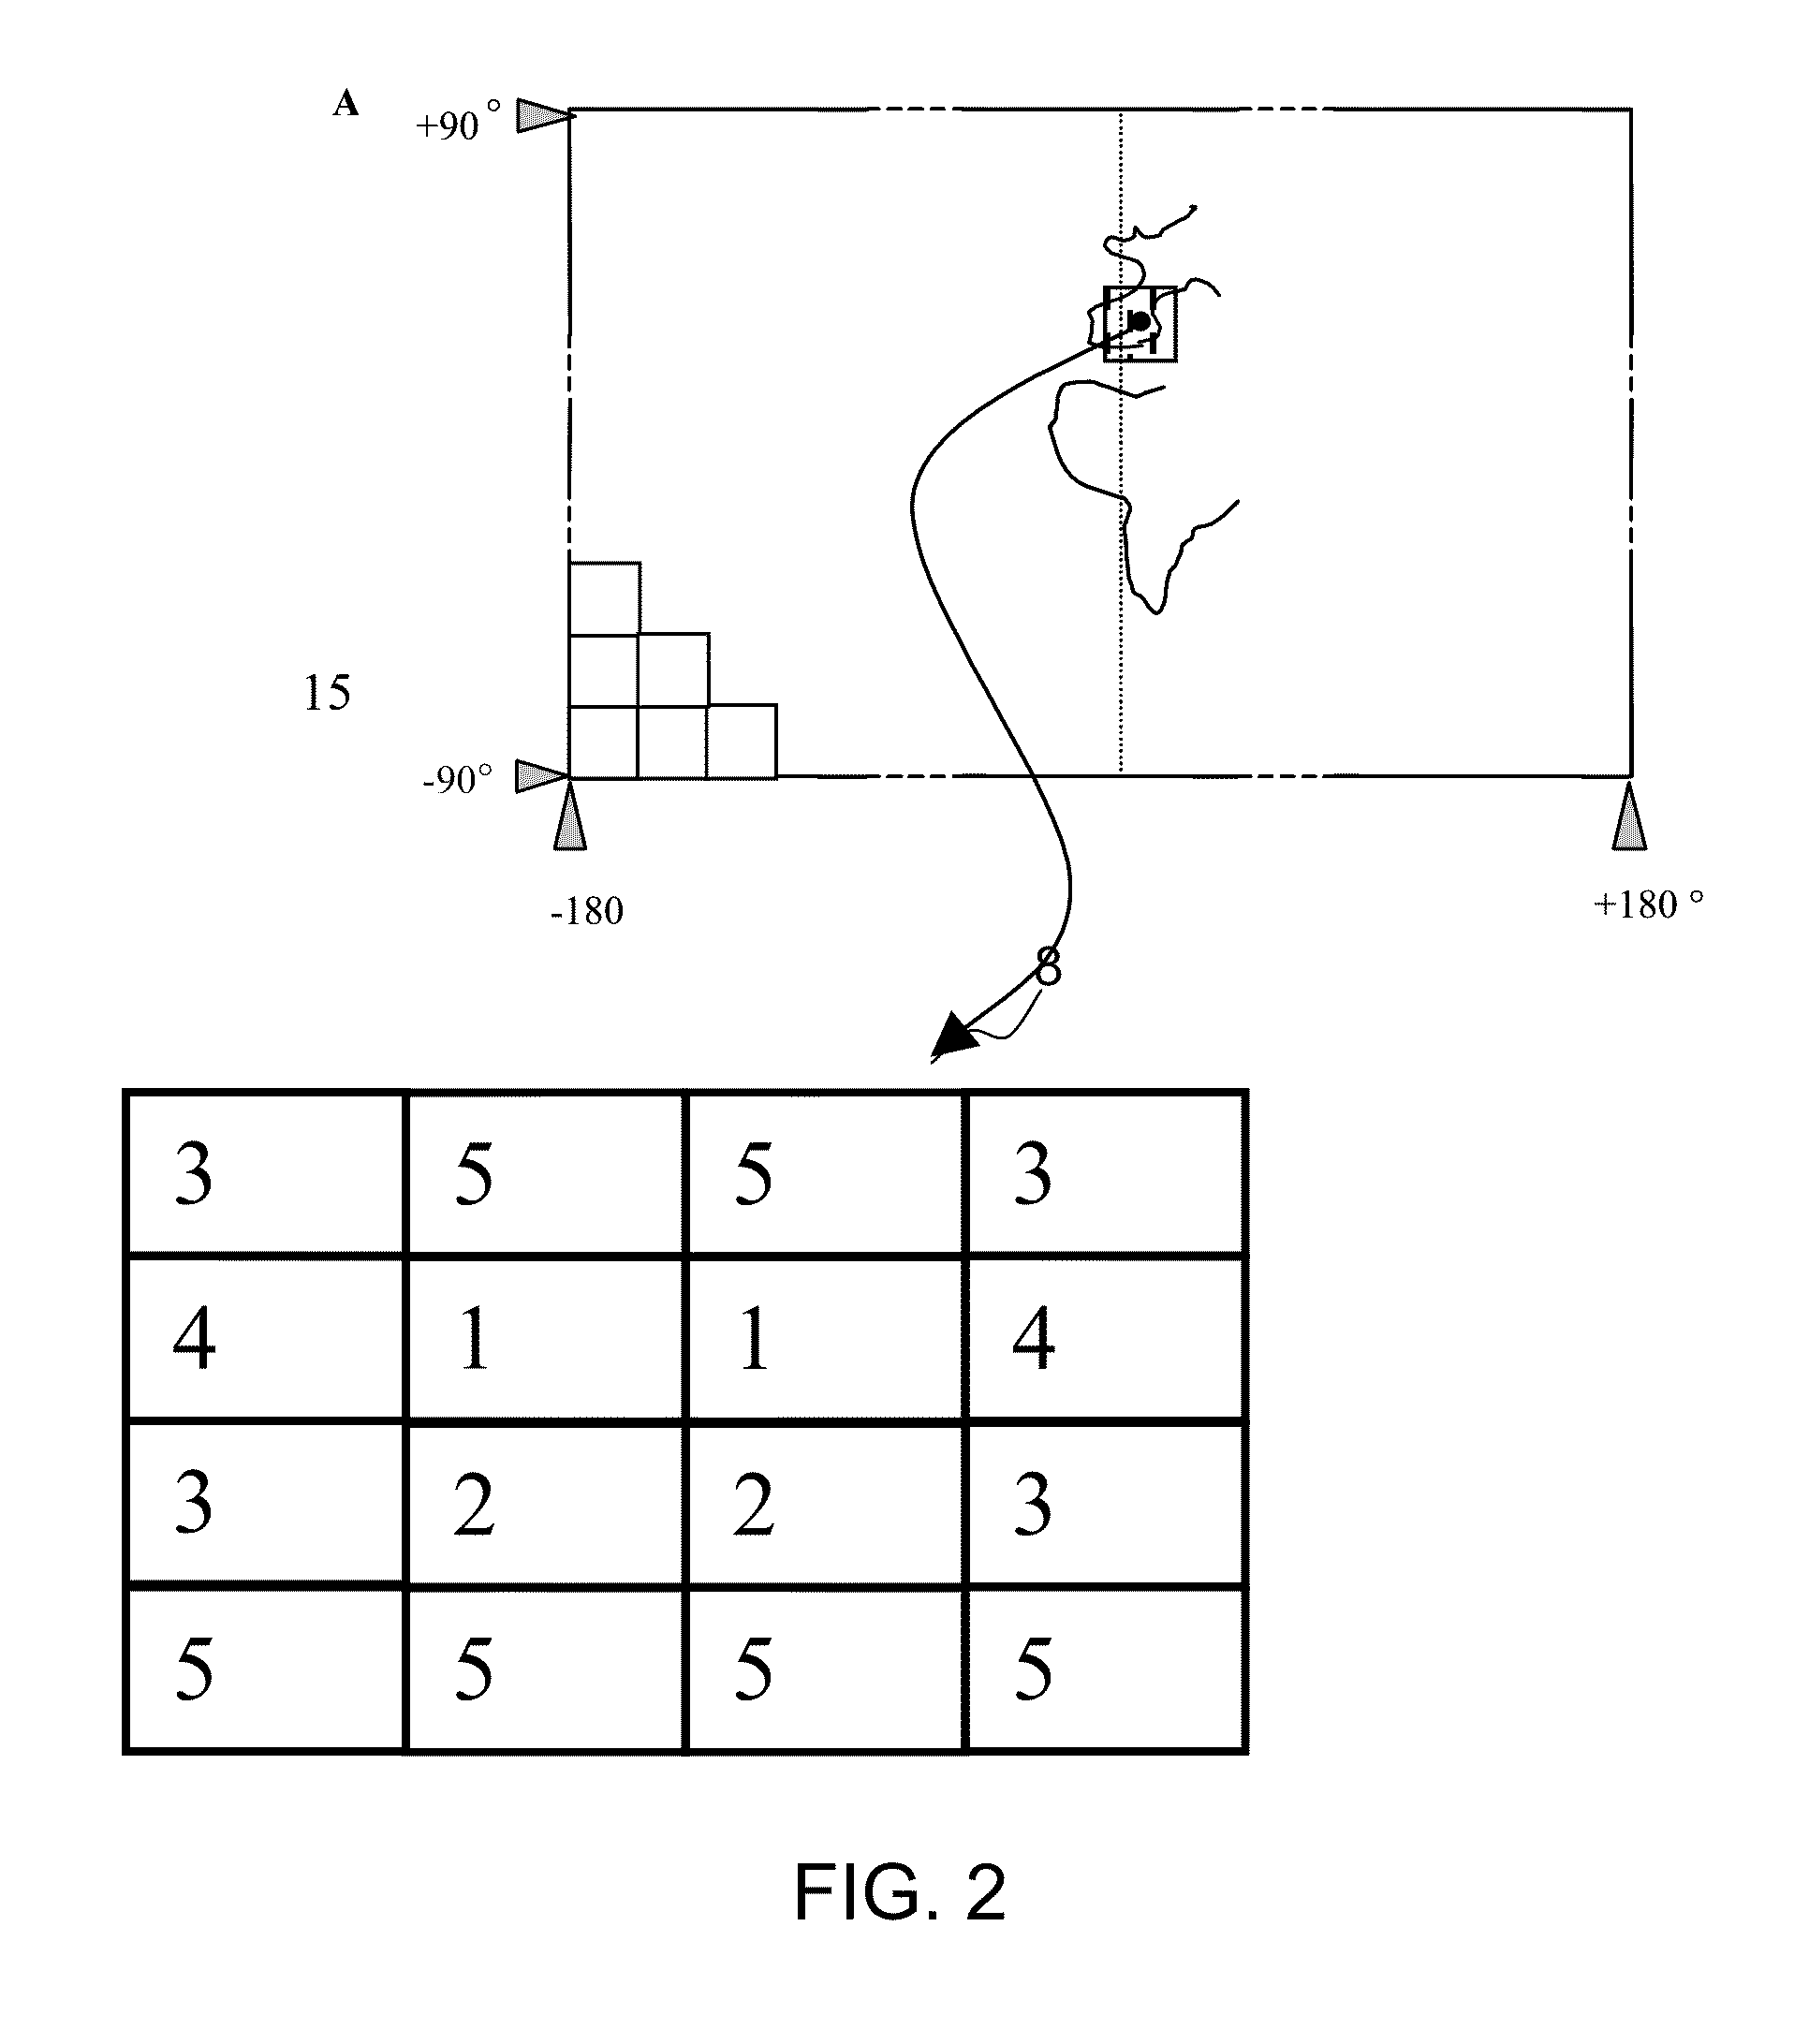 Method of alert calculation for an aircraft ground proximity warning system